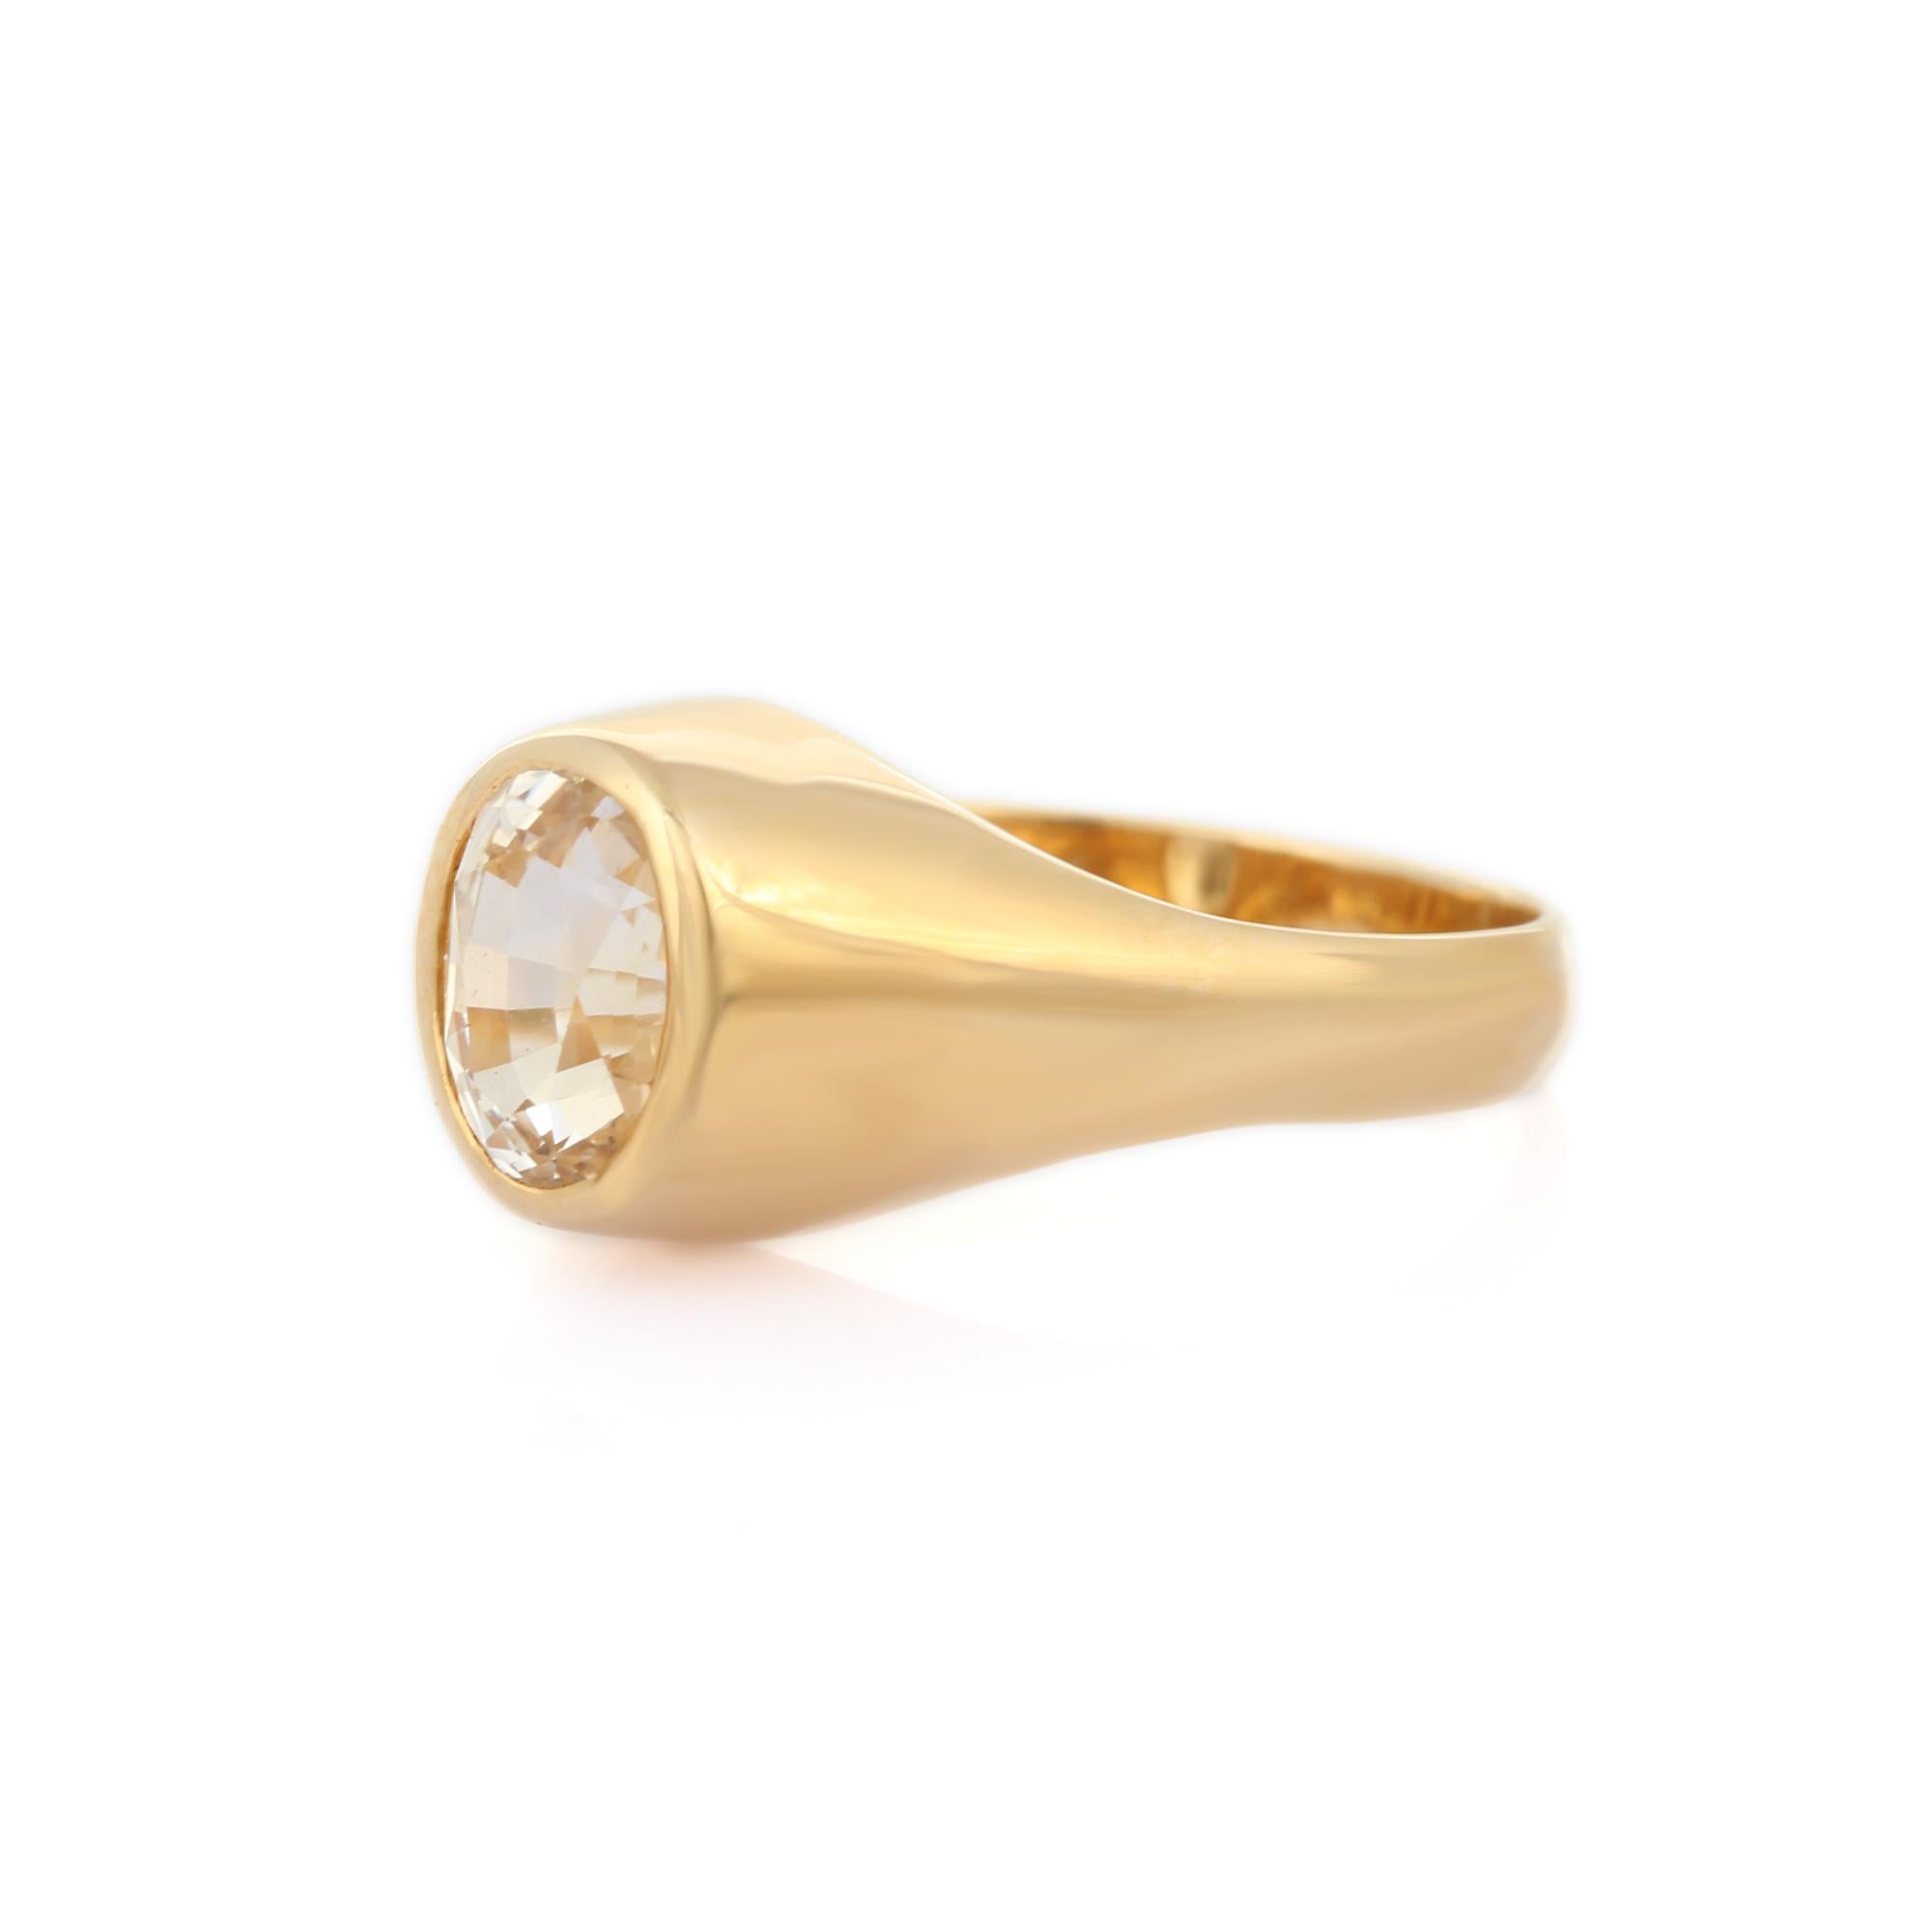 For Sale:  2.19 Carat Oval Cut Yellow Sapphire Solitaire Ring in 18 Karat Yellow Gold 2